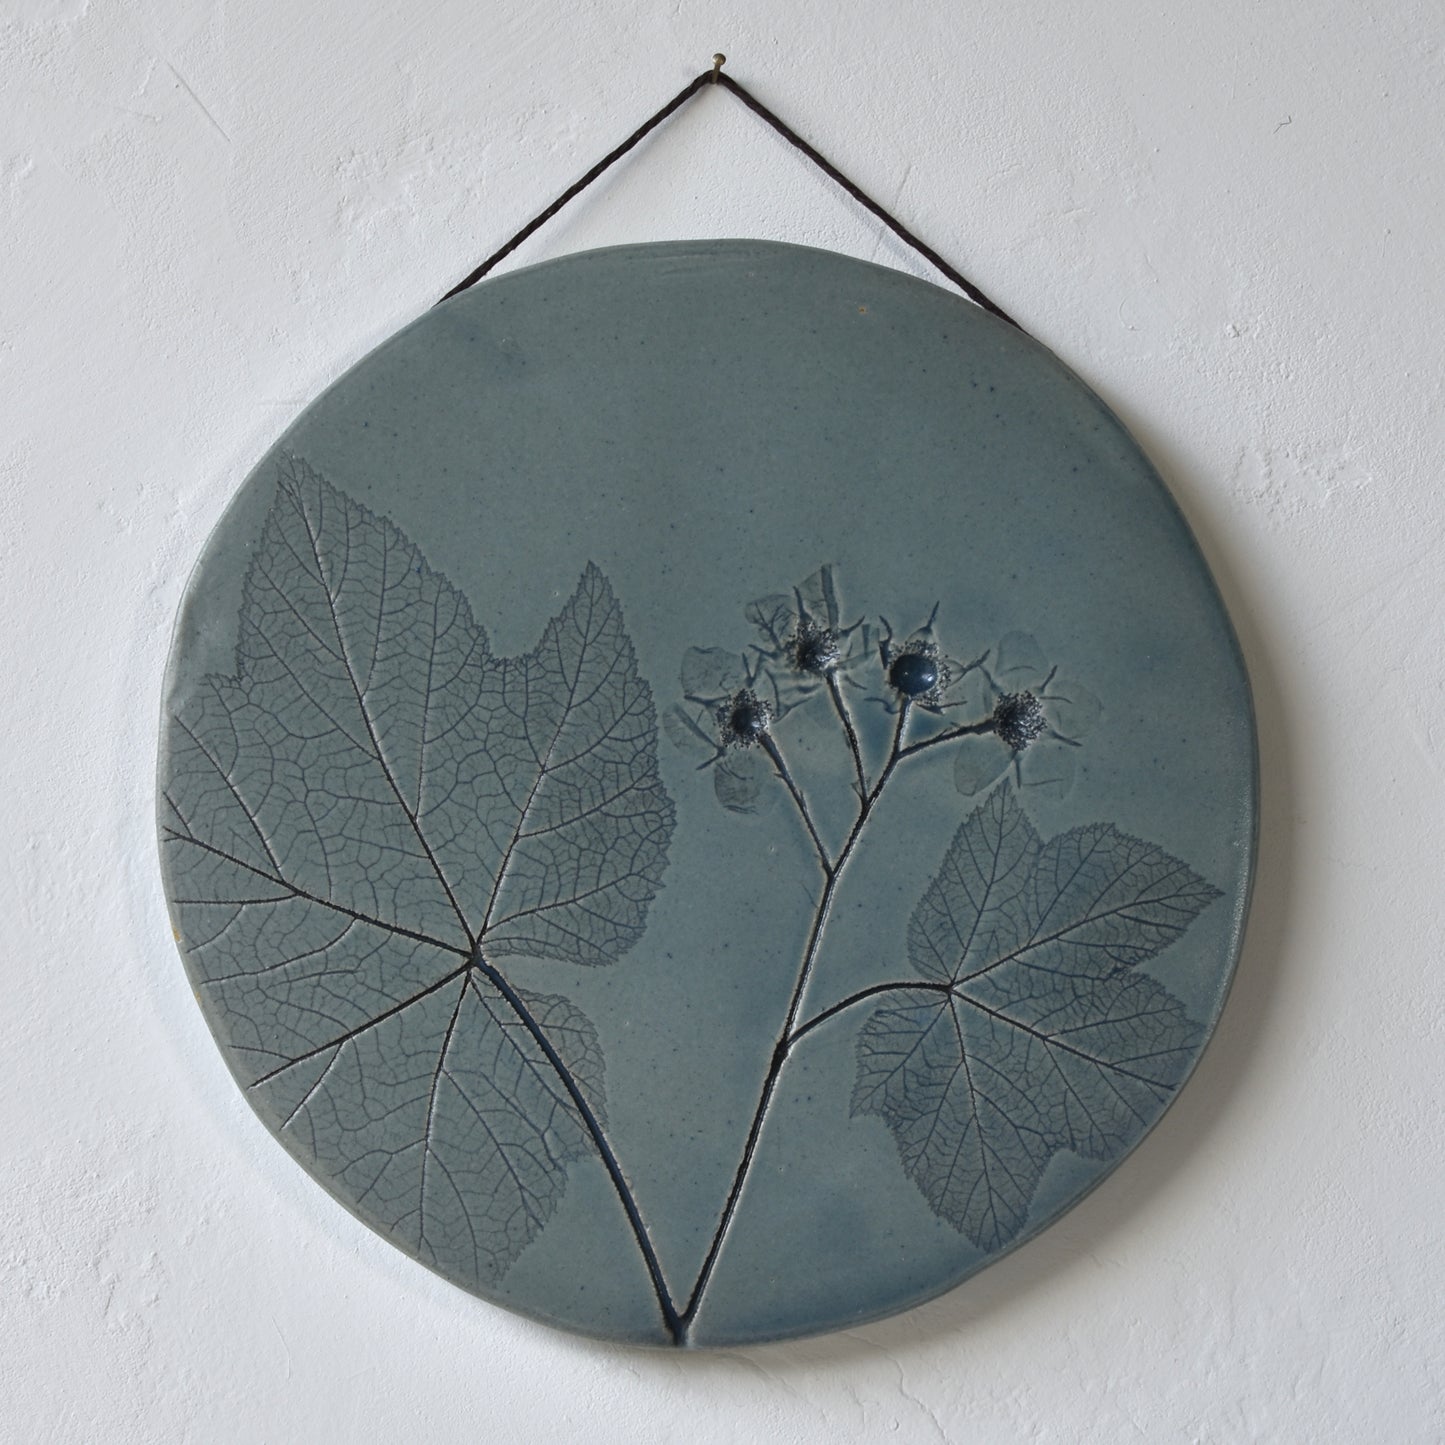 8.5" Thimbleberry Wall Hanging in Denim Blue